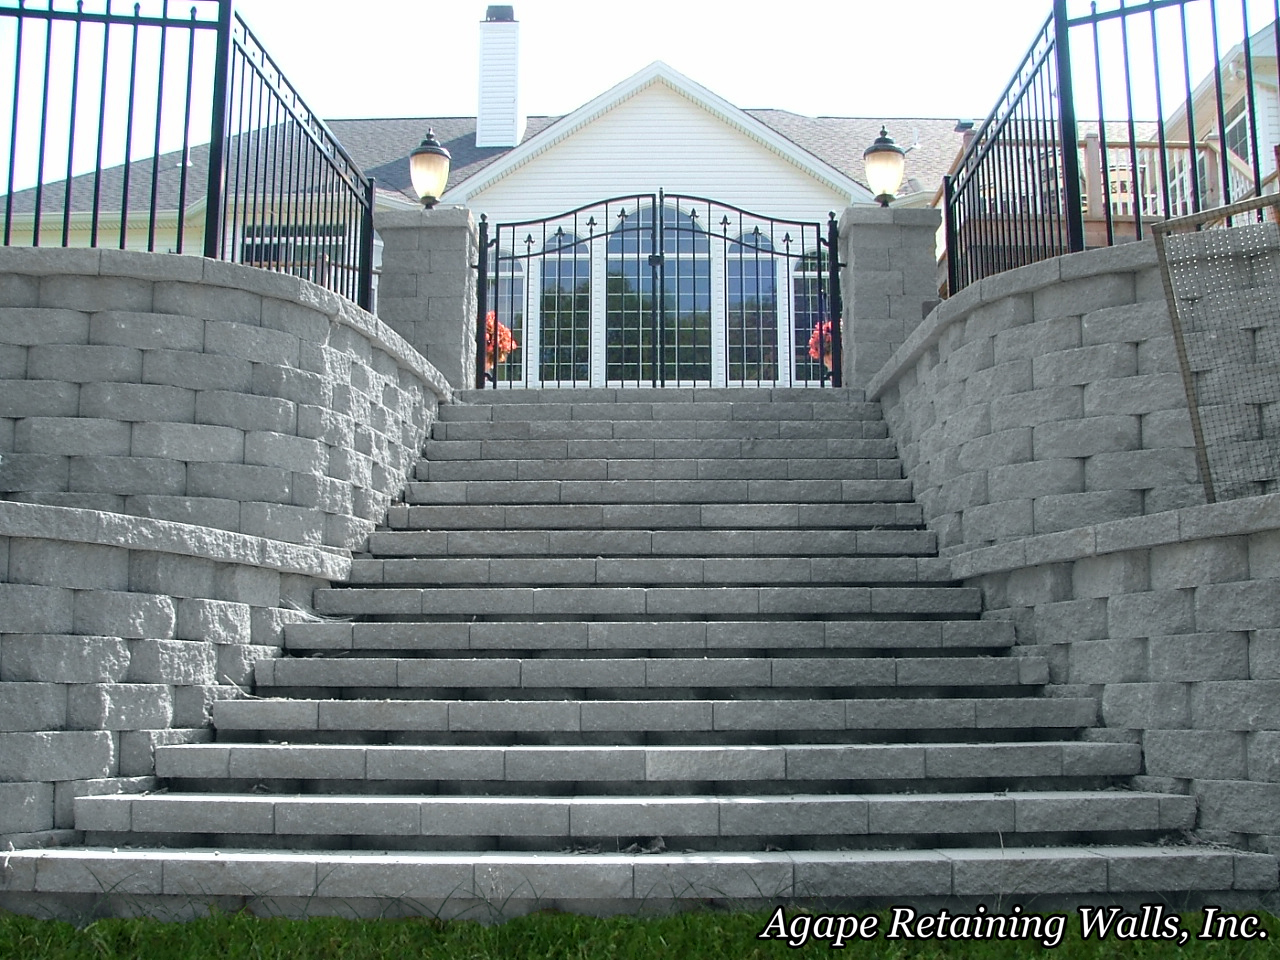 Grand Staircase designed & installed by Agape Retaining